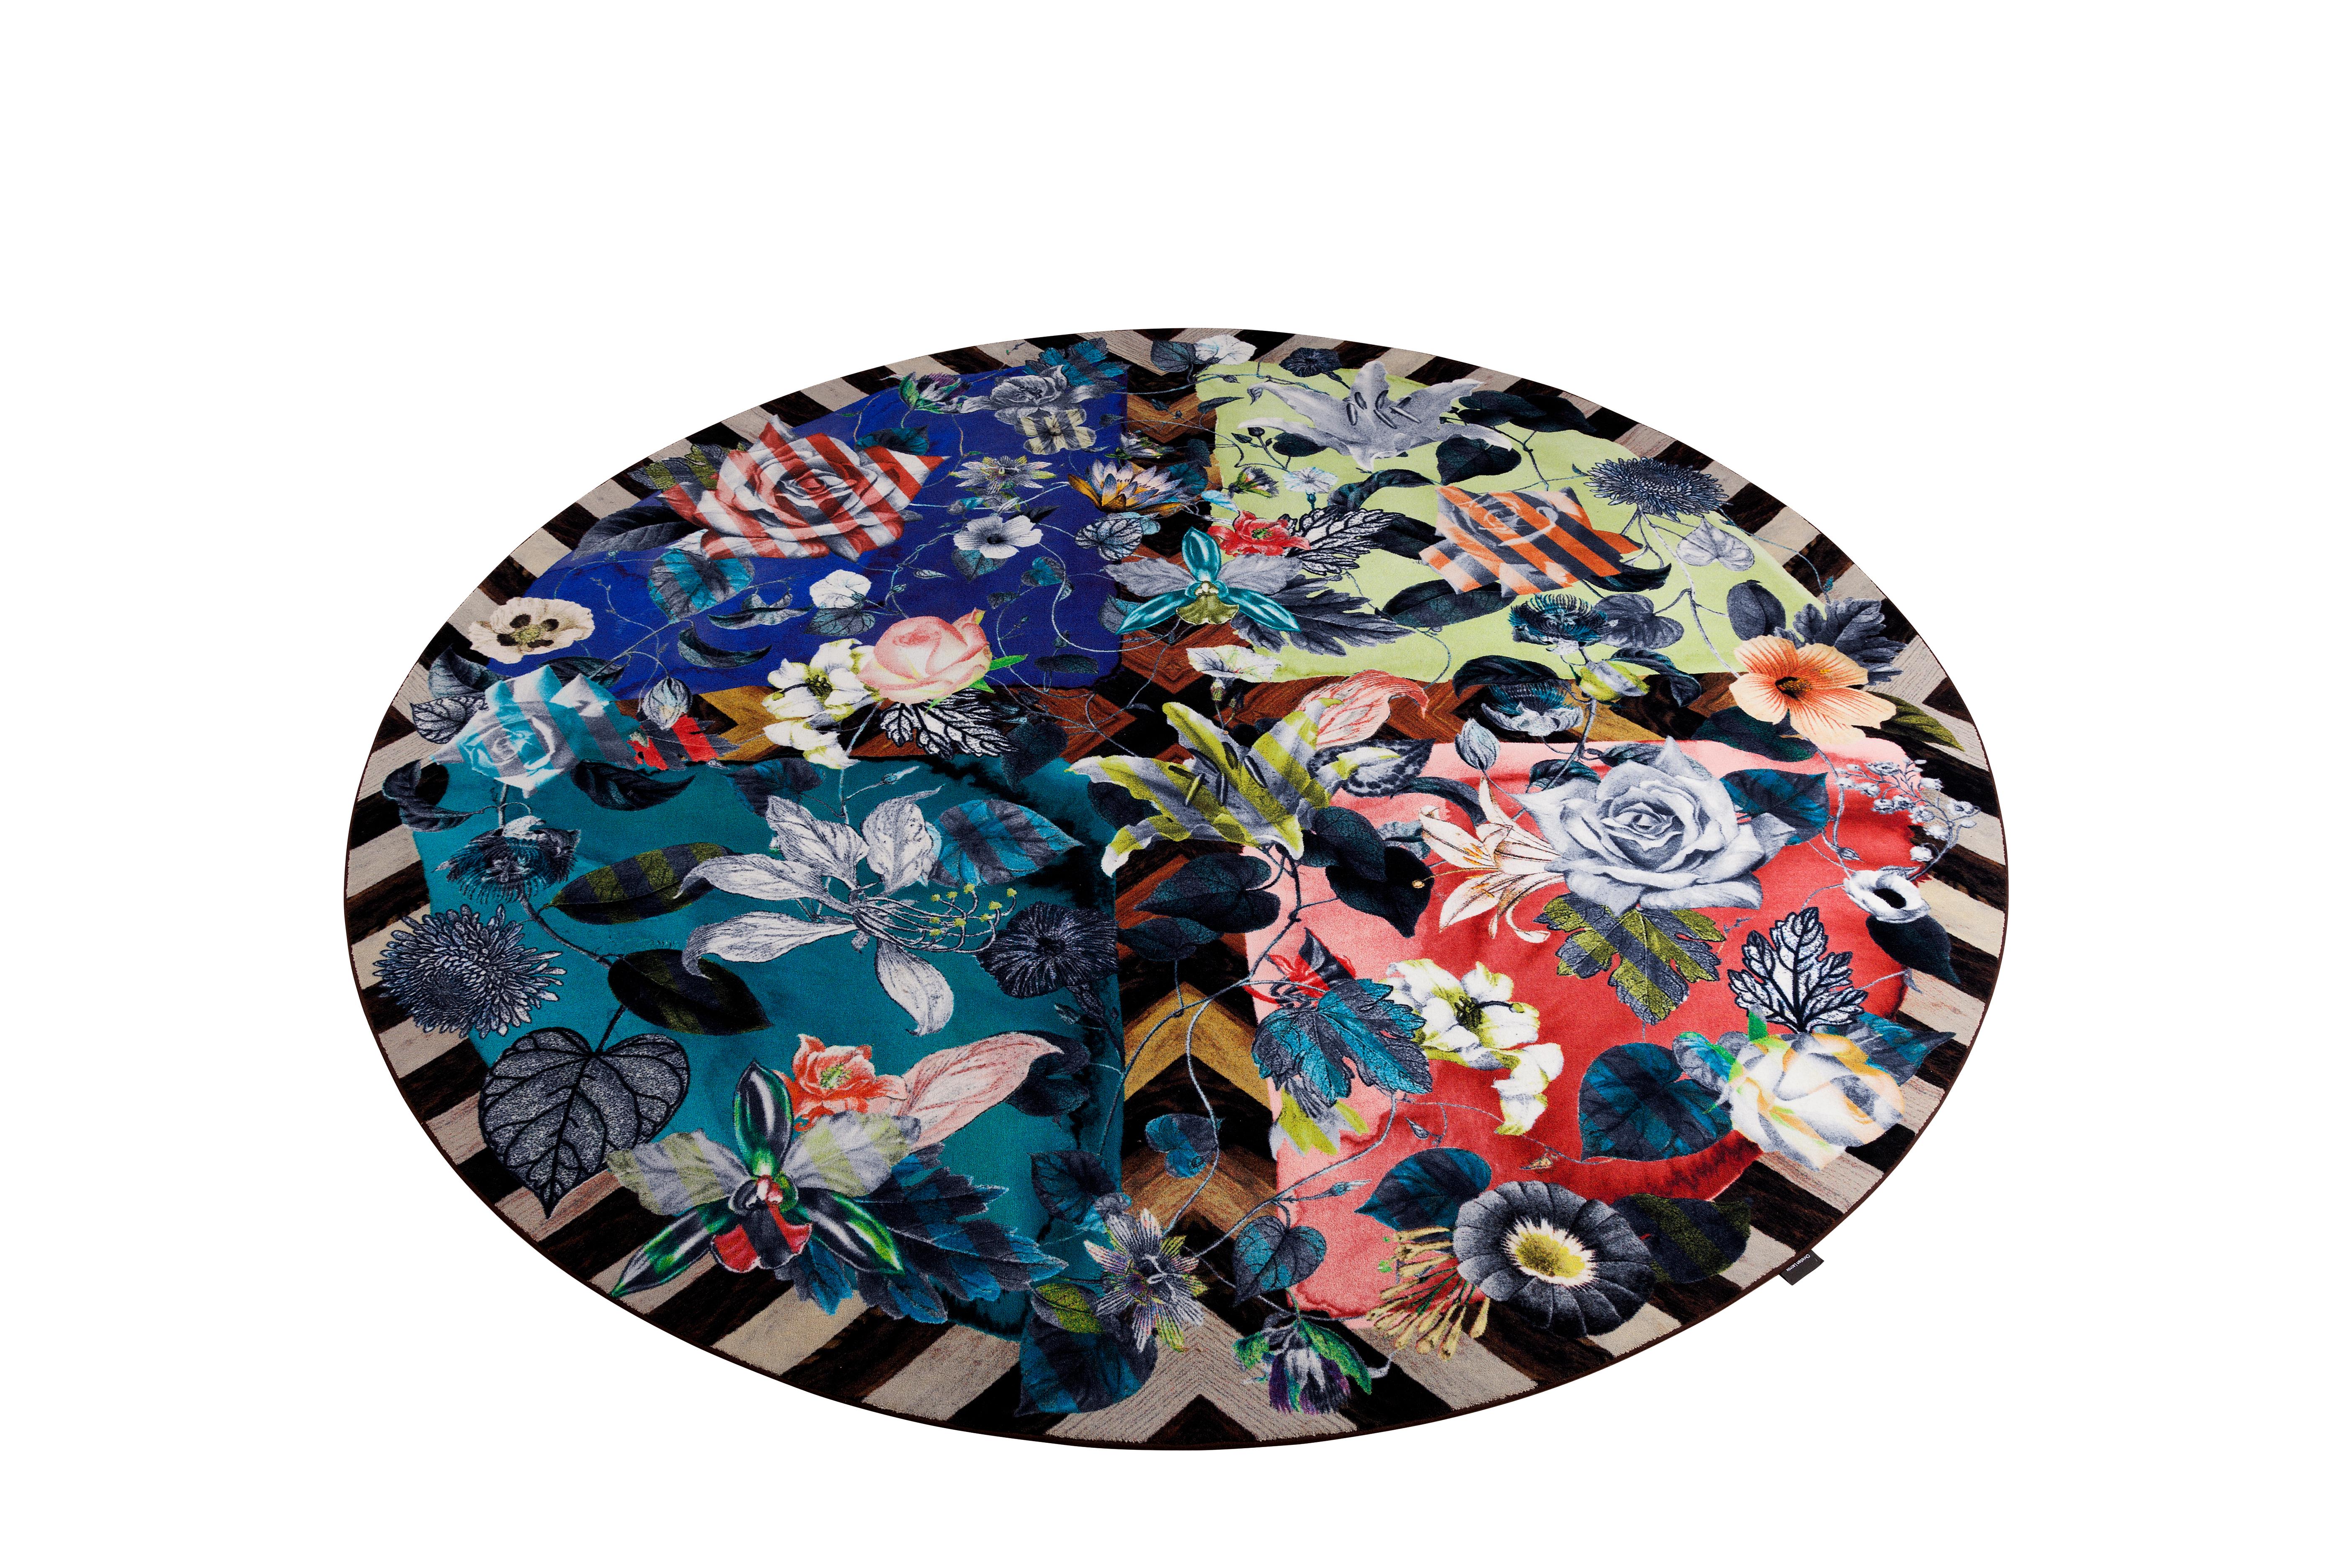 Moooi Small Guimauve rug in Soft Yarn Polyamide by Christian Lacroix Maison

Since the launch of the Couture House in 1987, the Christian Lacroix style has been unique, exuberant, colorful and baroque. Today, Christian Lacroix Maison expresses its